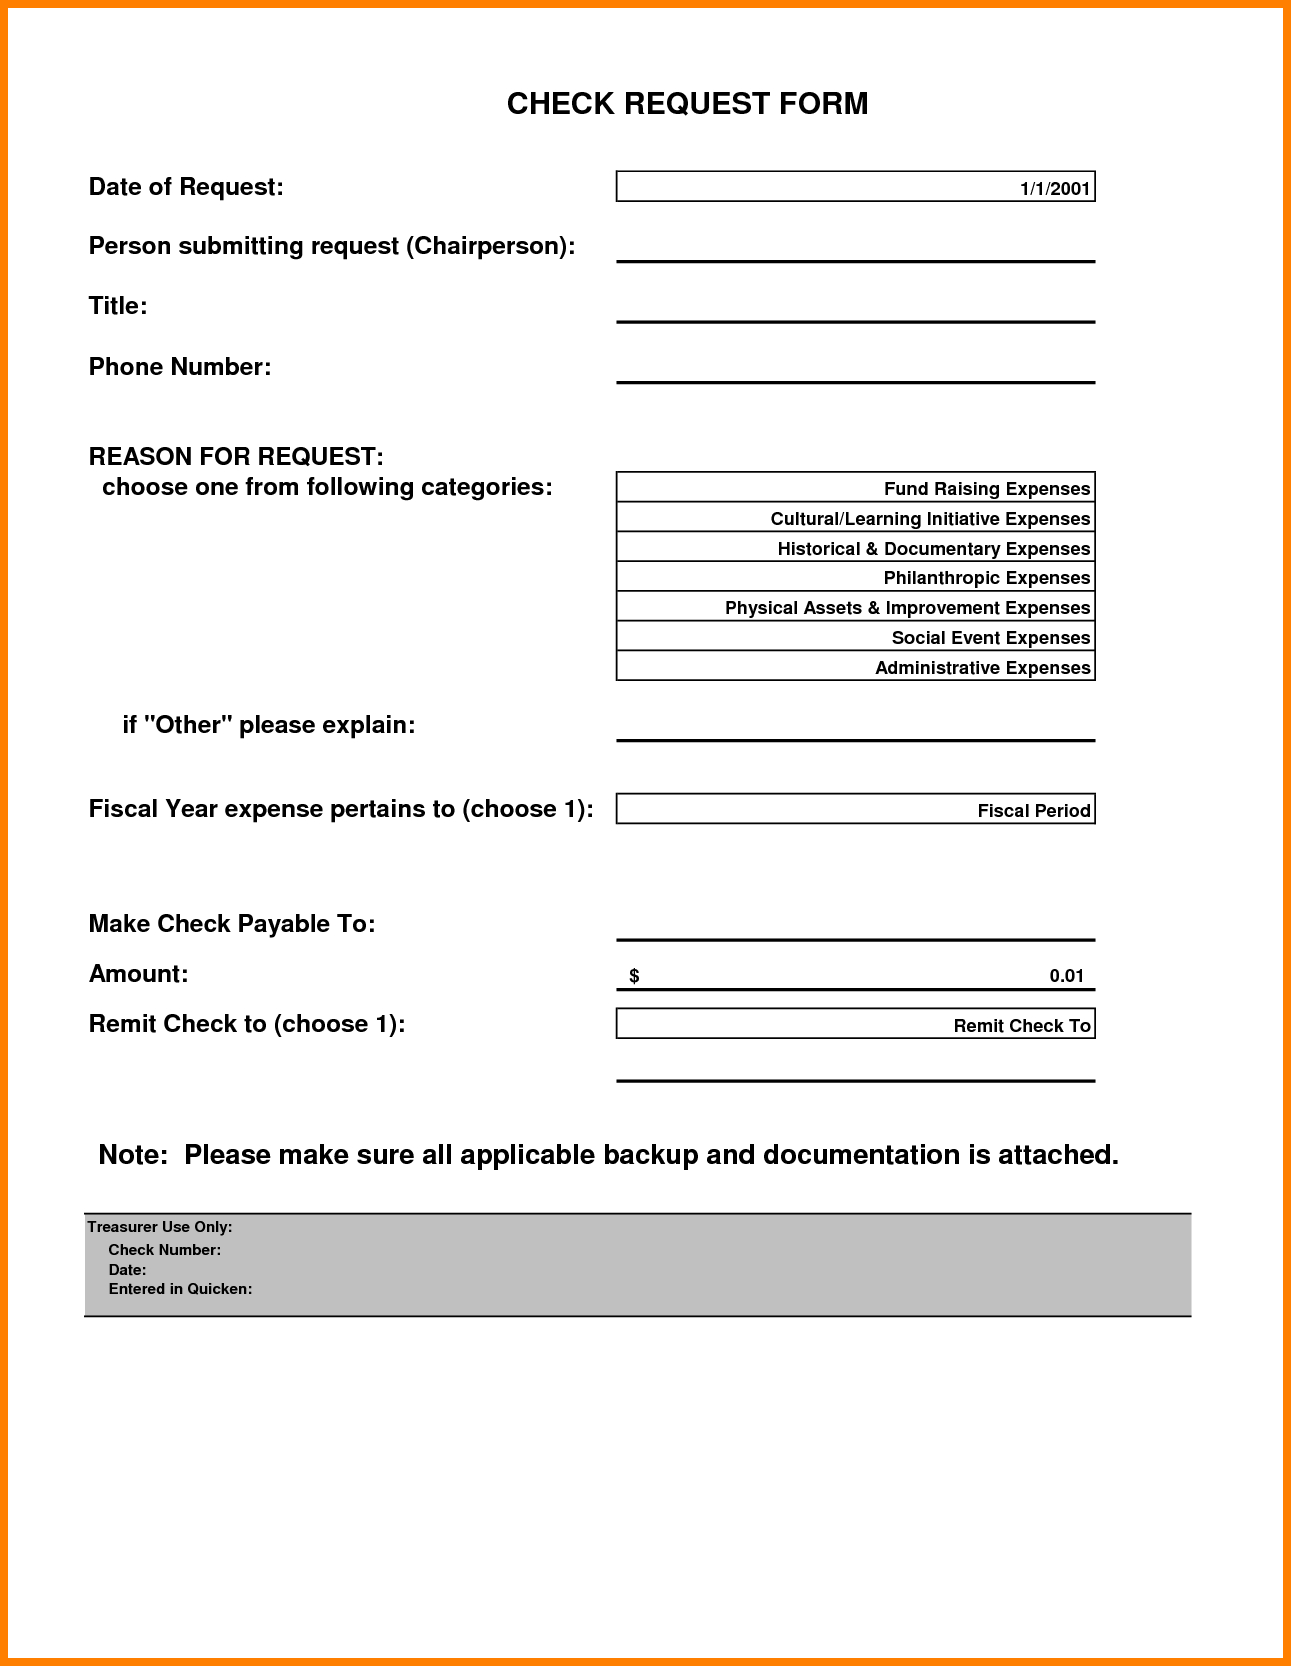 Check Request Form Template Excel 4 Fabulous Florida Keys With Check Request Template Word